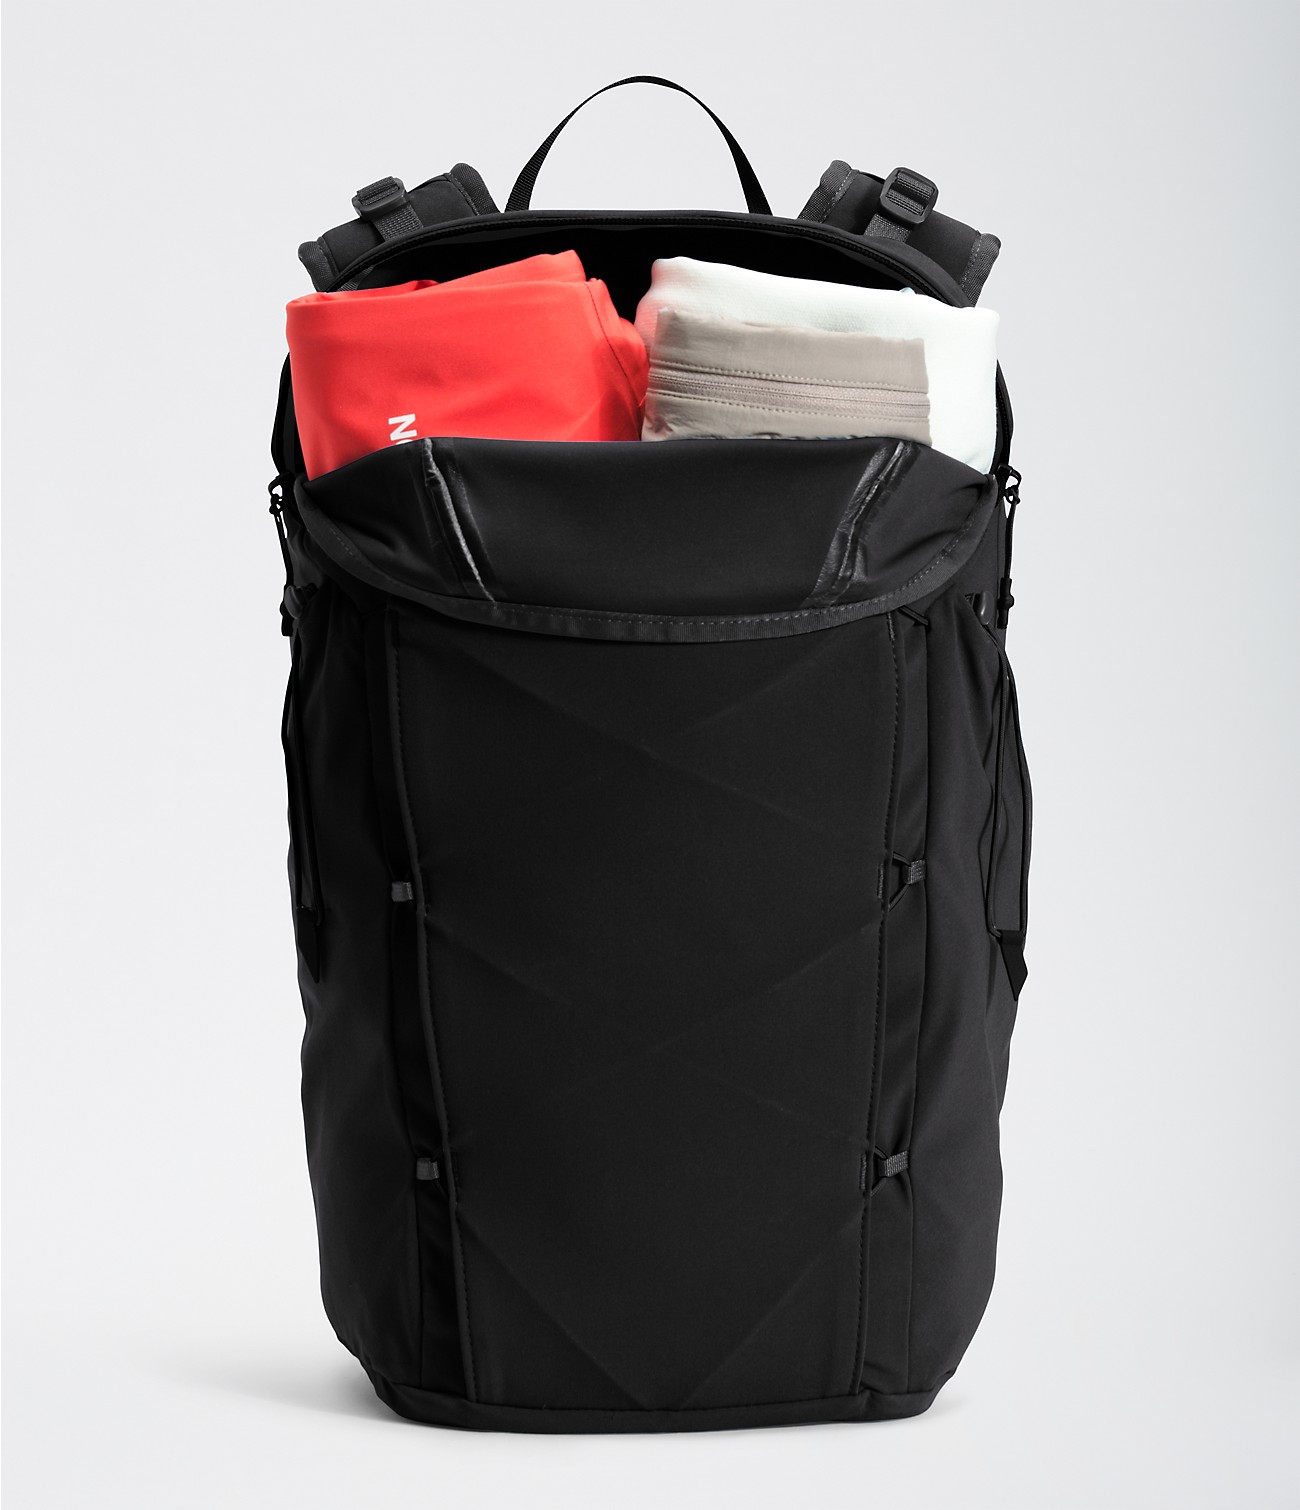 Advant 20 Backpack | The North Face